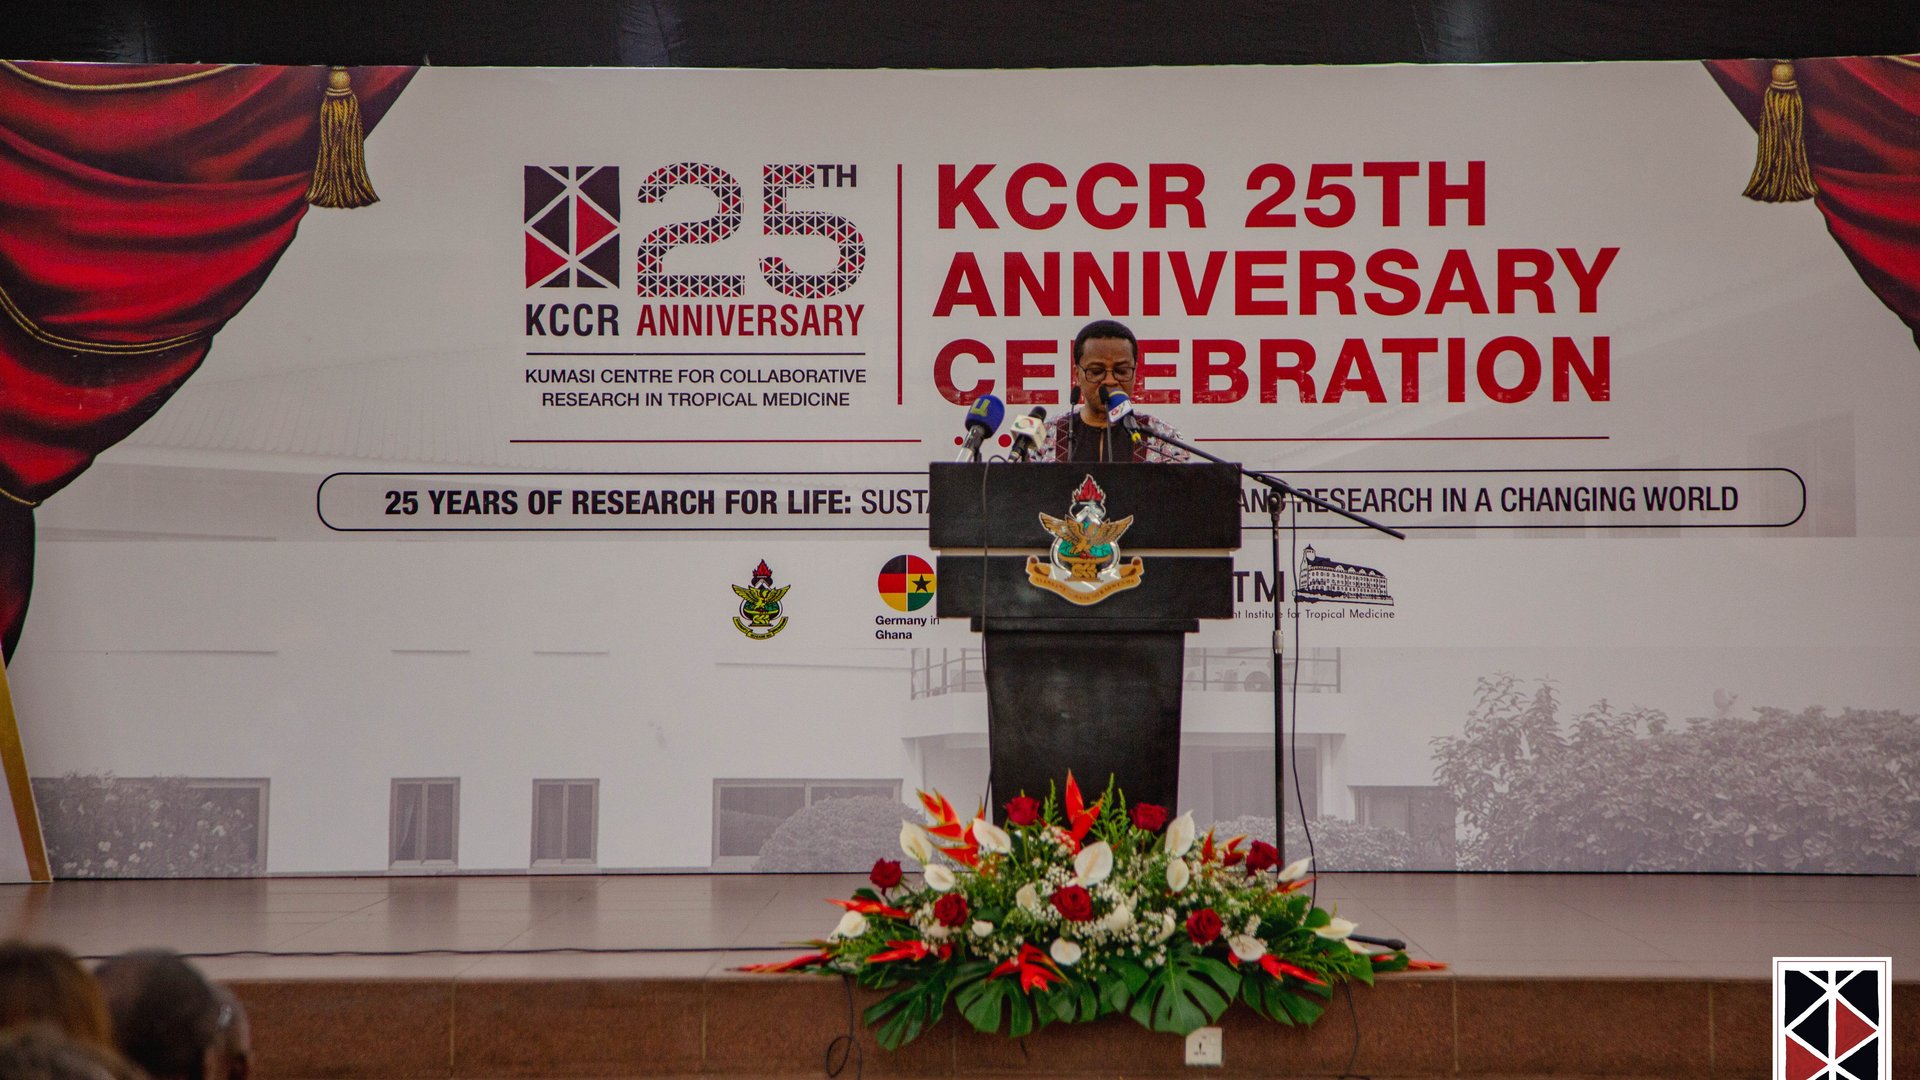 The Scientific Director of the KCCR, Prof. Richard Phillips, stands at the flower-decked lectern and gives his speech.